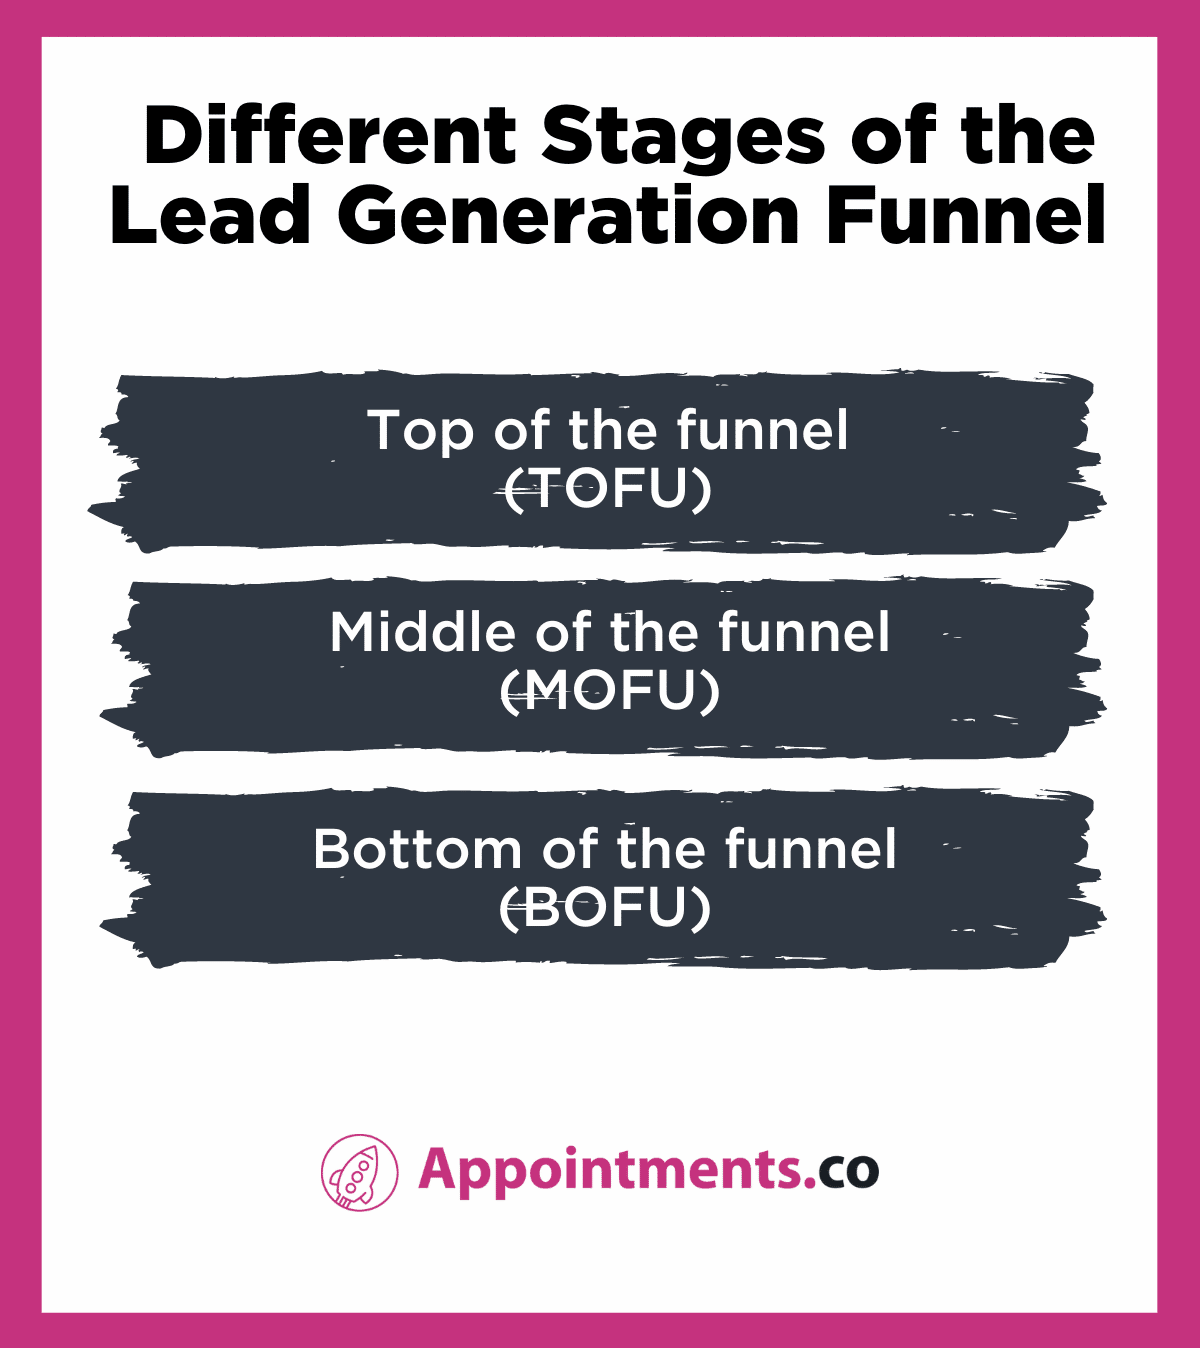 Different Stages of the Lead Generation Funnel